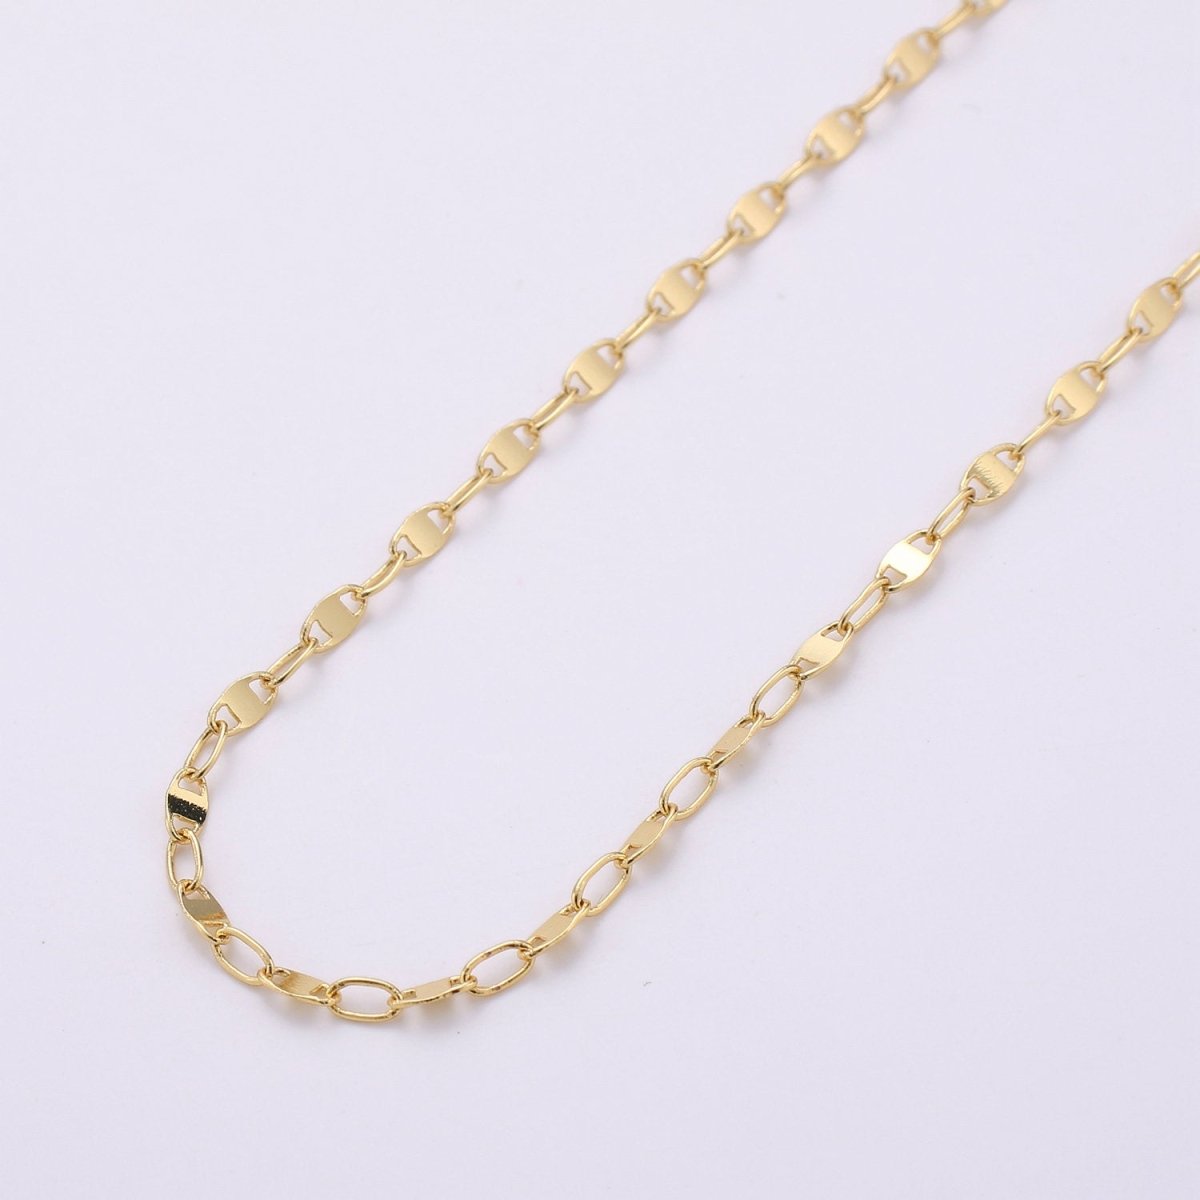 24K Gold Filled Anchor MARINER Chain, 3mm Flat Shiny Link Bracelet, Anklet or Necklace, Jewelry for Men and Women Necklace Component, CABLE Chain | ROLL-158 Clearance Pricing - DLUXCA